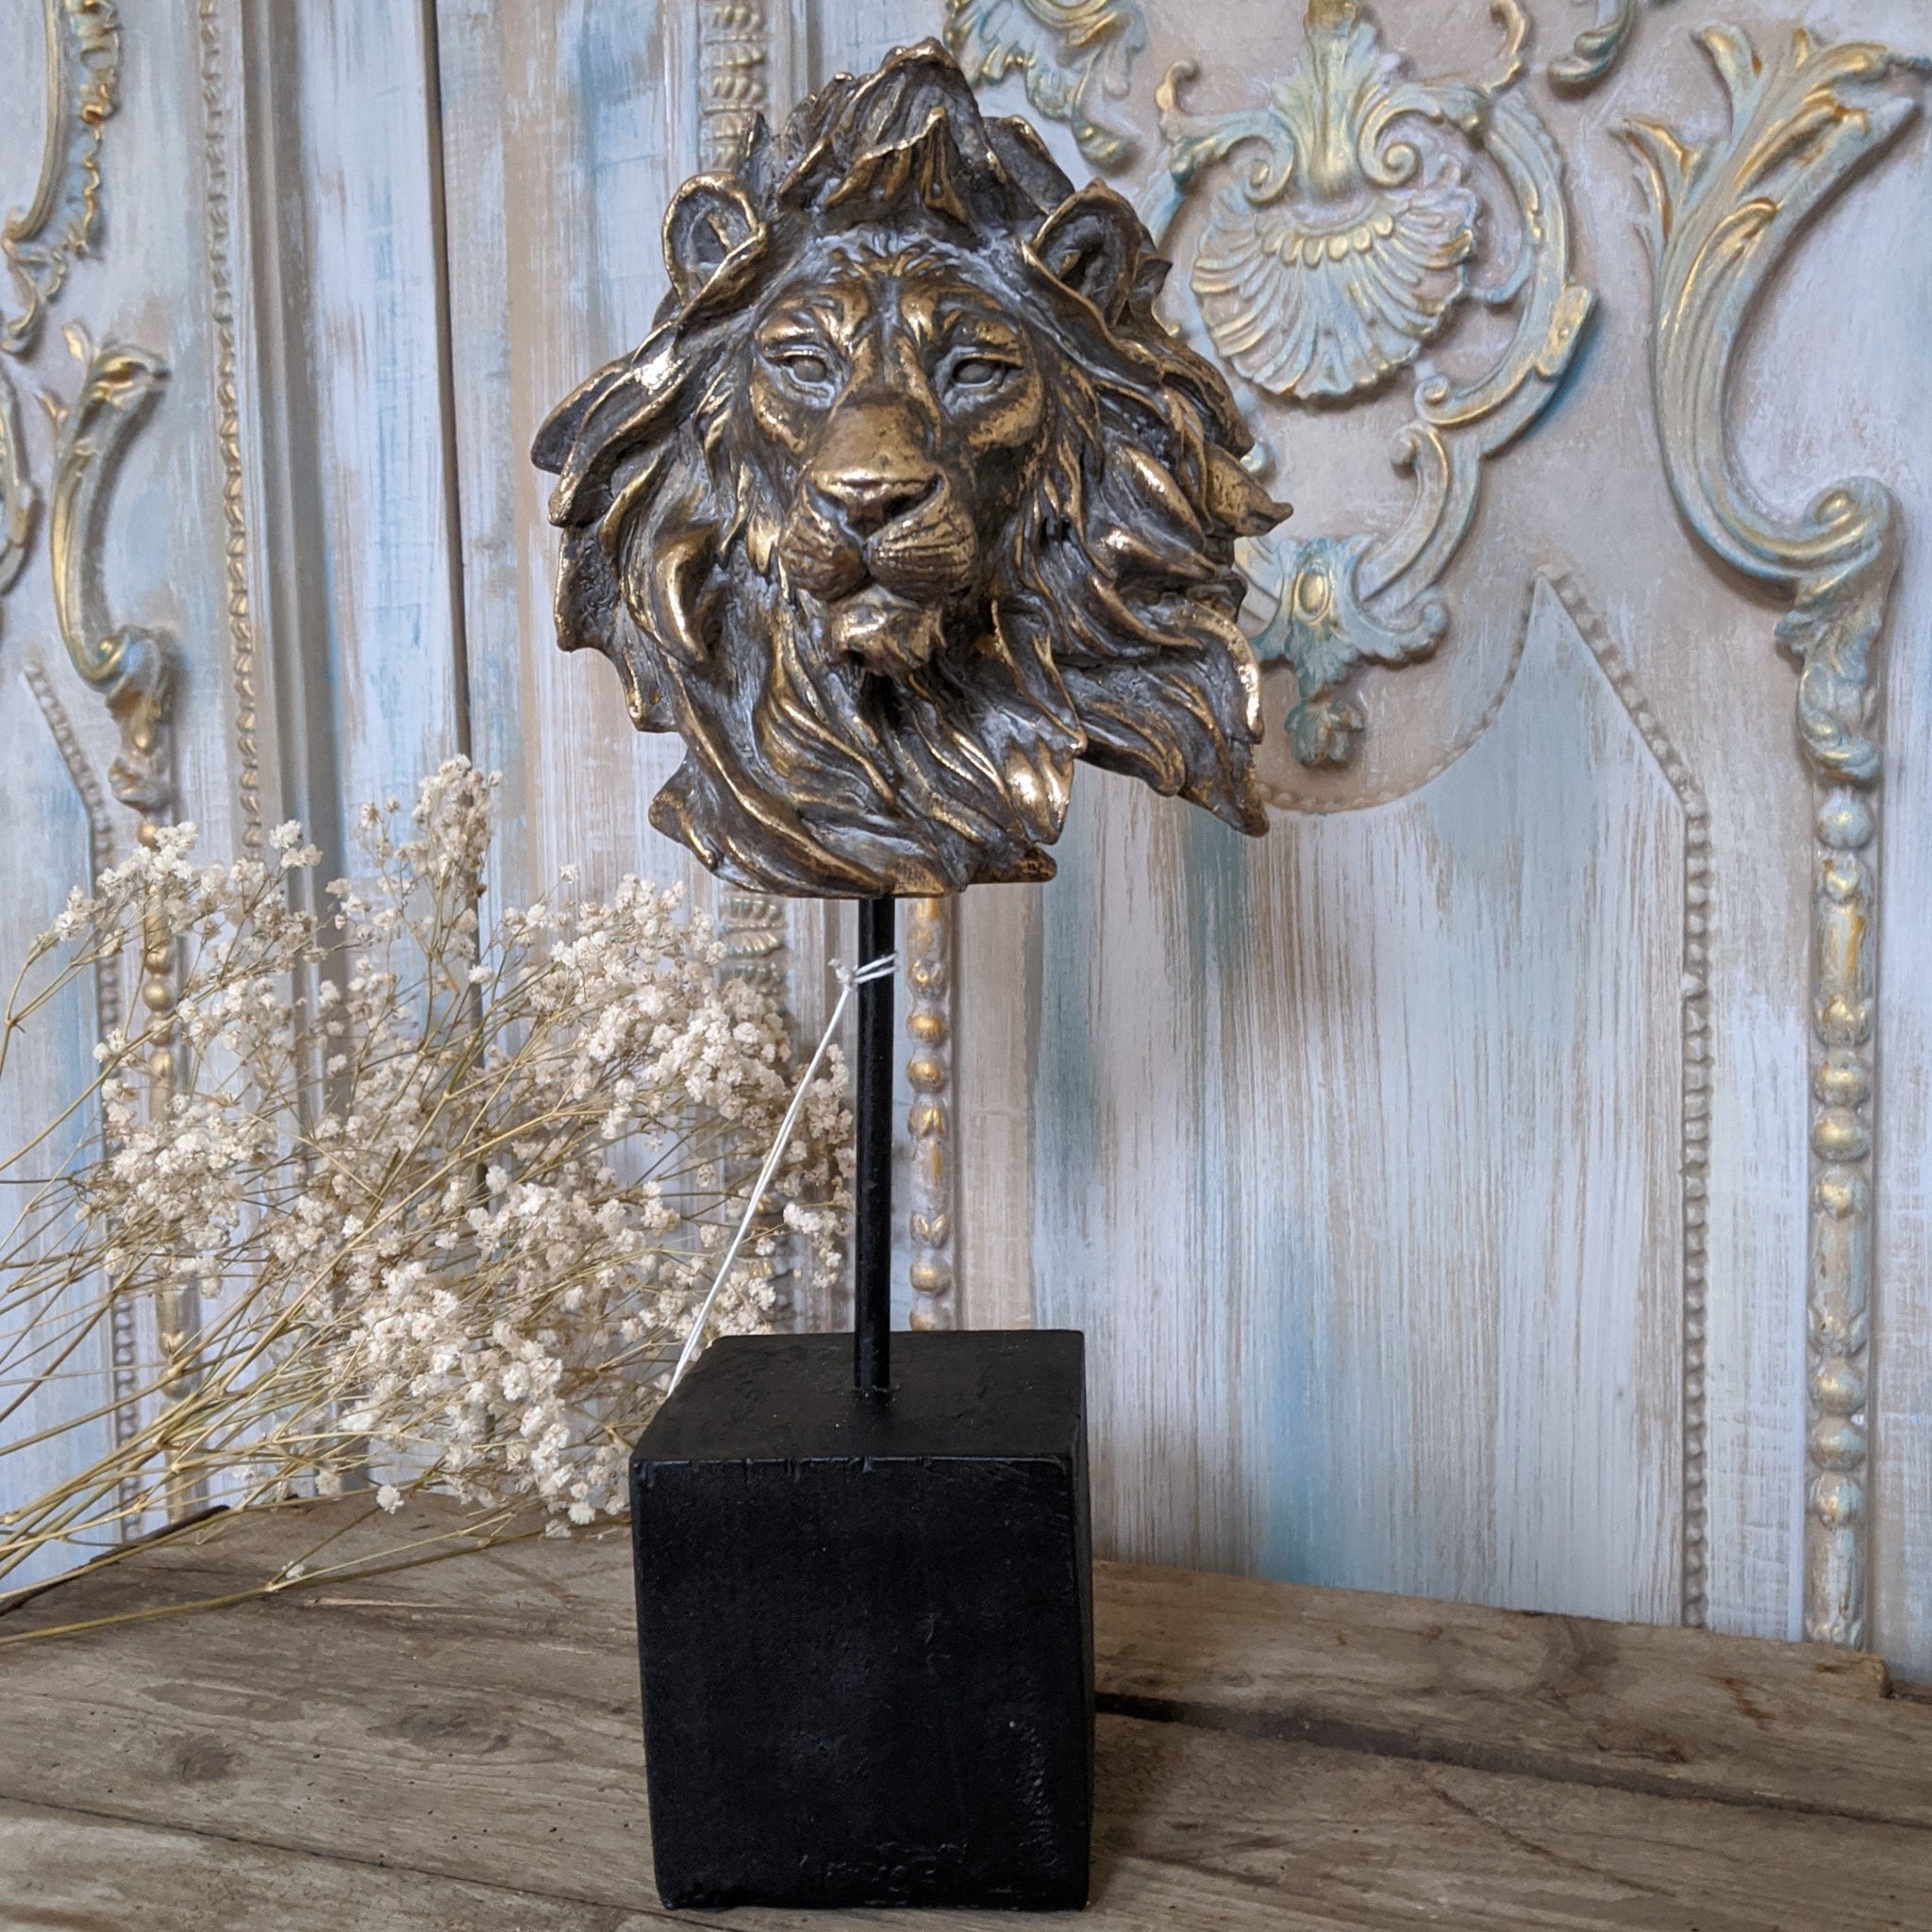 New Ornate LIONS Head Gold BUST On Stand Rustic Vintage Style